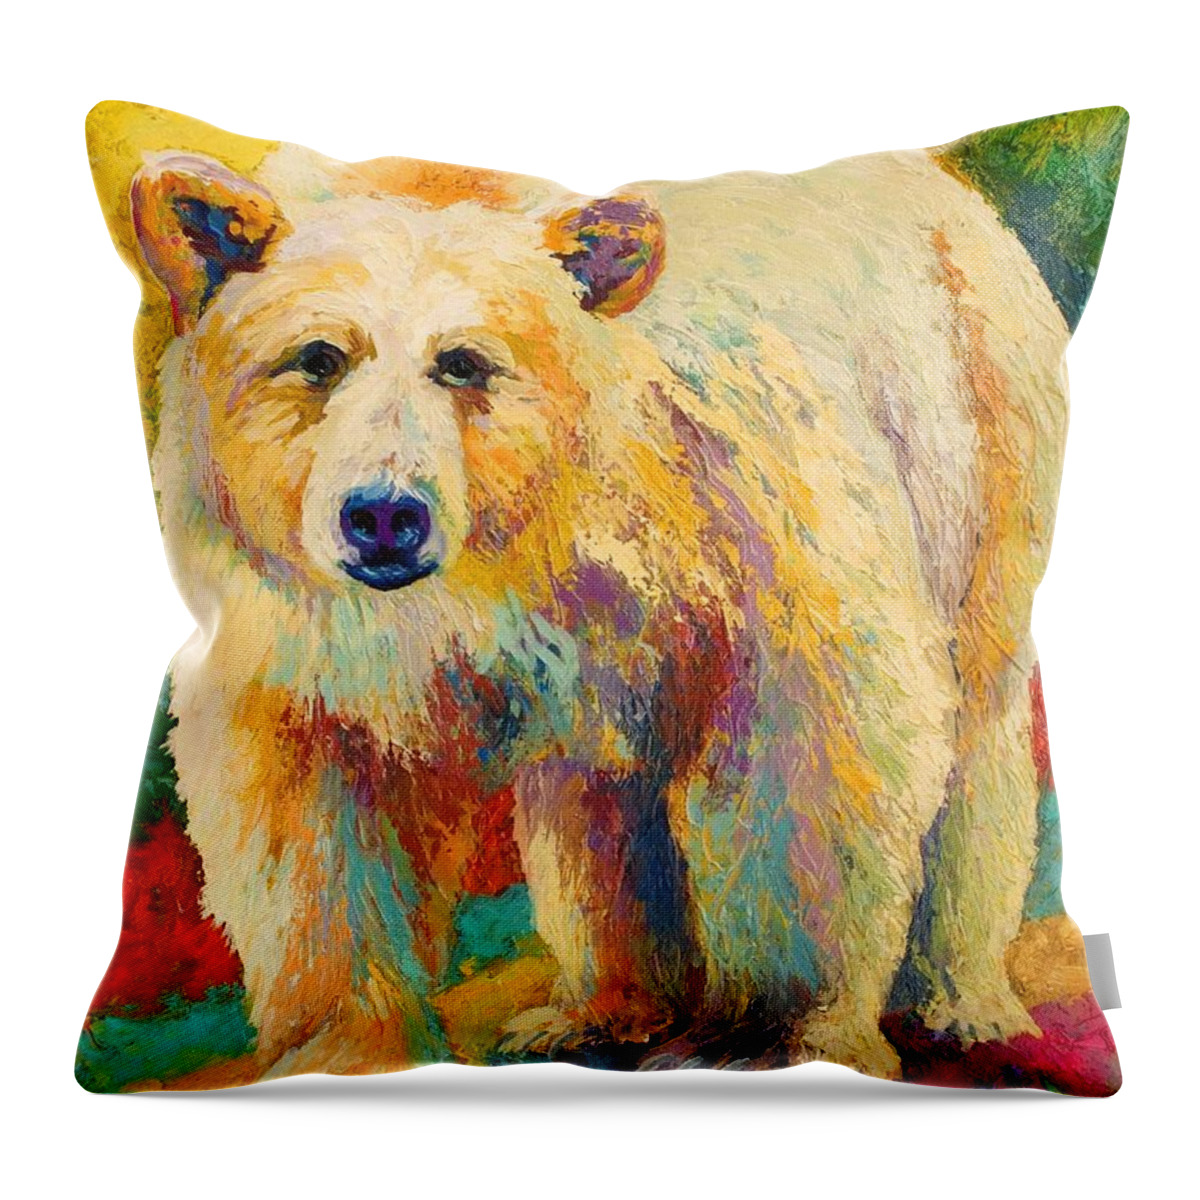 Kermode Throw Pillow featuring the painting Legend Of The Misty Fjords by Marion Rose